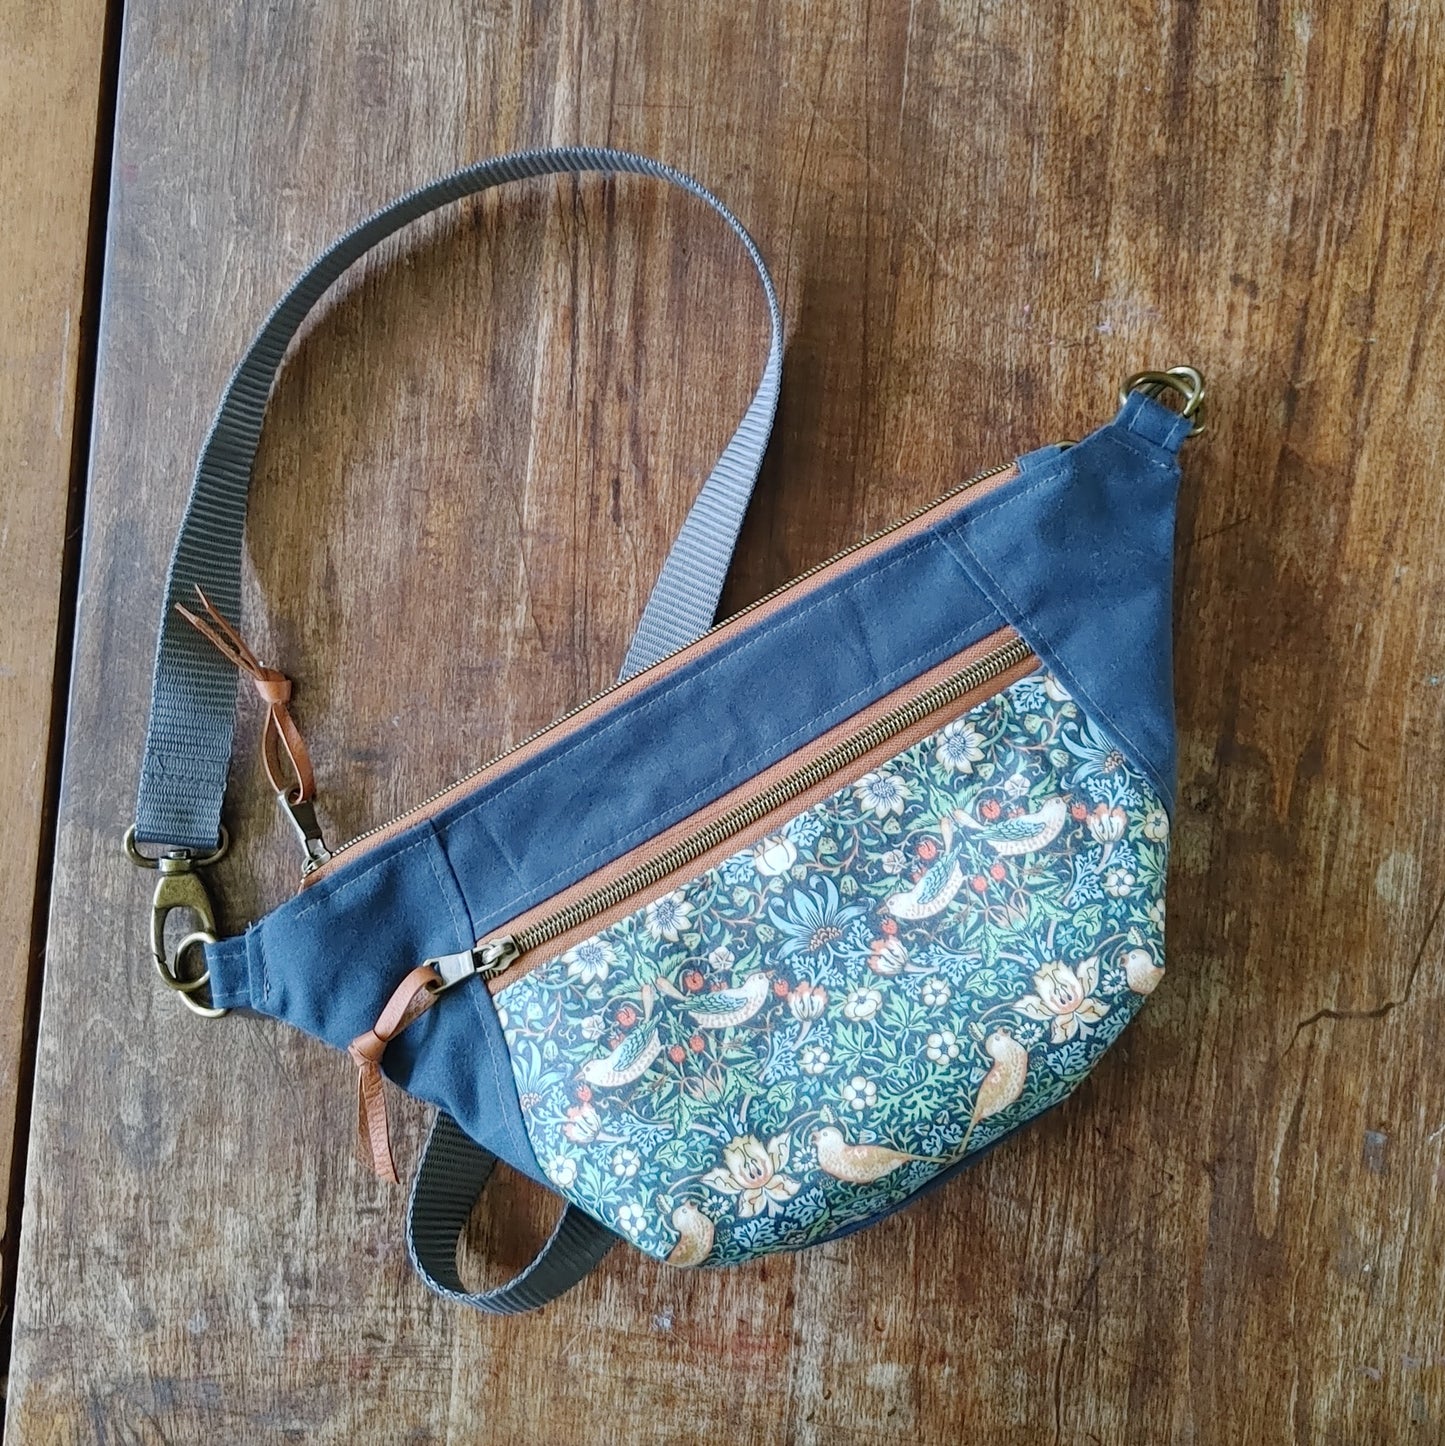 Belt Bag / Hip Pack Large Capacity in Waxed Canvas and Print